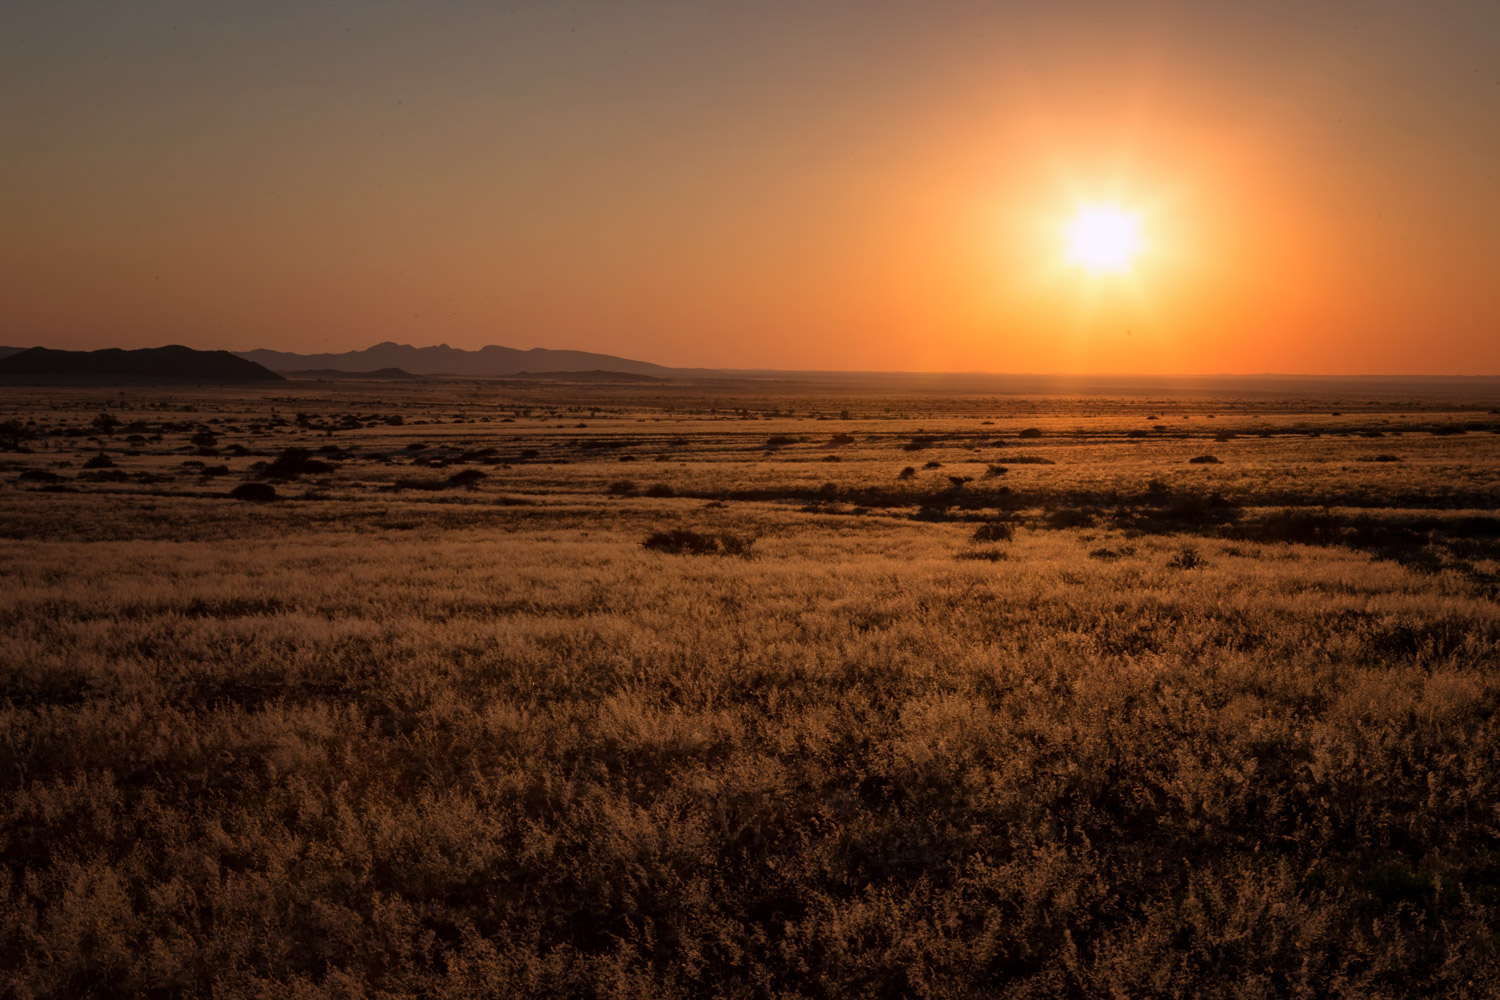 Postcards from Namibia